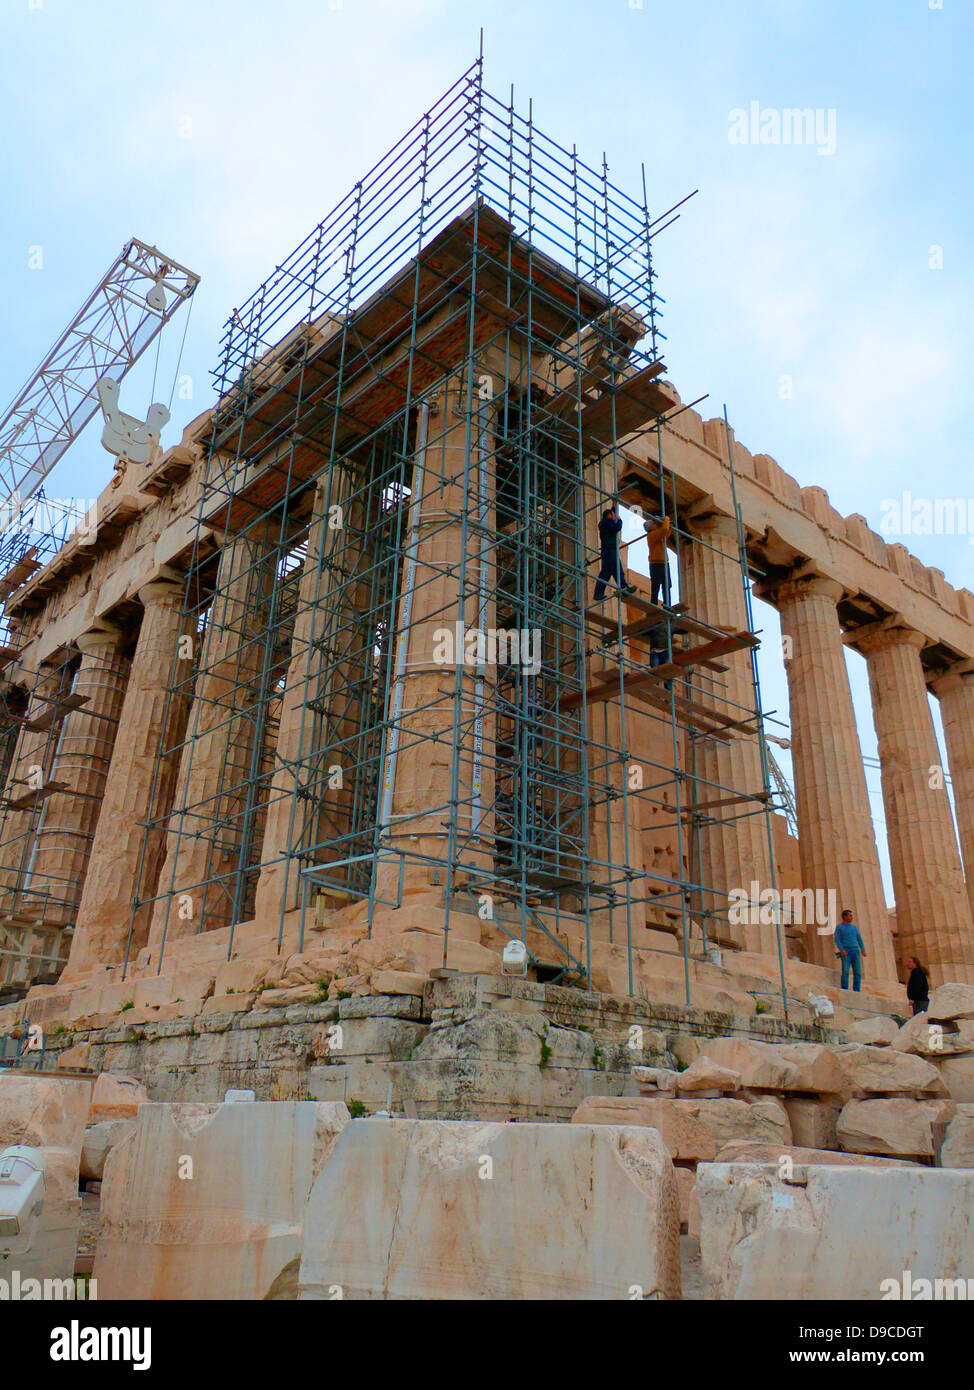 The Parthenon temple on the Athenian Acropolis, Greece, dedicated to the Greek goddess Athena, whom the people of Athens considered their virgin patron. Its construction began in 447 BC when the Athenian Empire was at the height of its power. It was completed in 438 BC, although decoration of the Parthenon continued until 432 BC. It is the most important surviving building of Classical Greece, Stock Photo